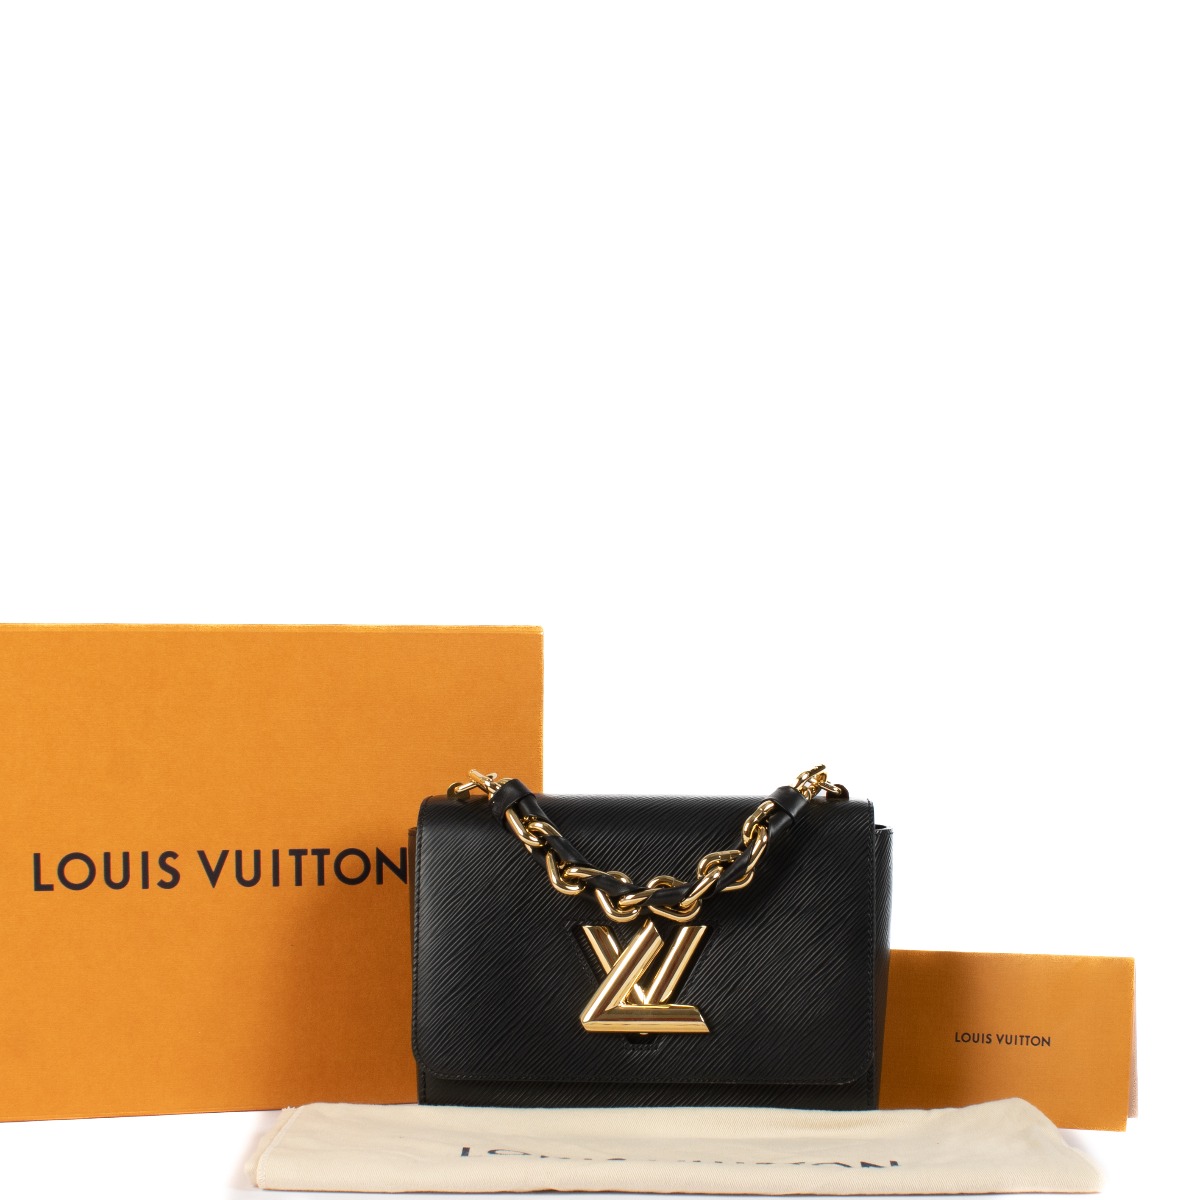 Louis Vuitton Padlock Necklace with Double Layer Chain | eBay